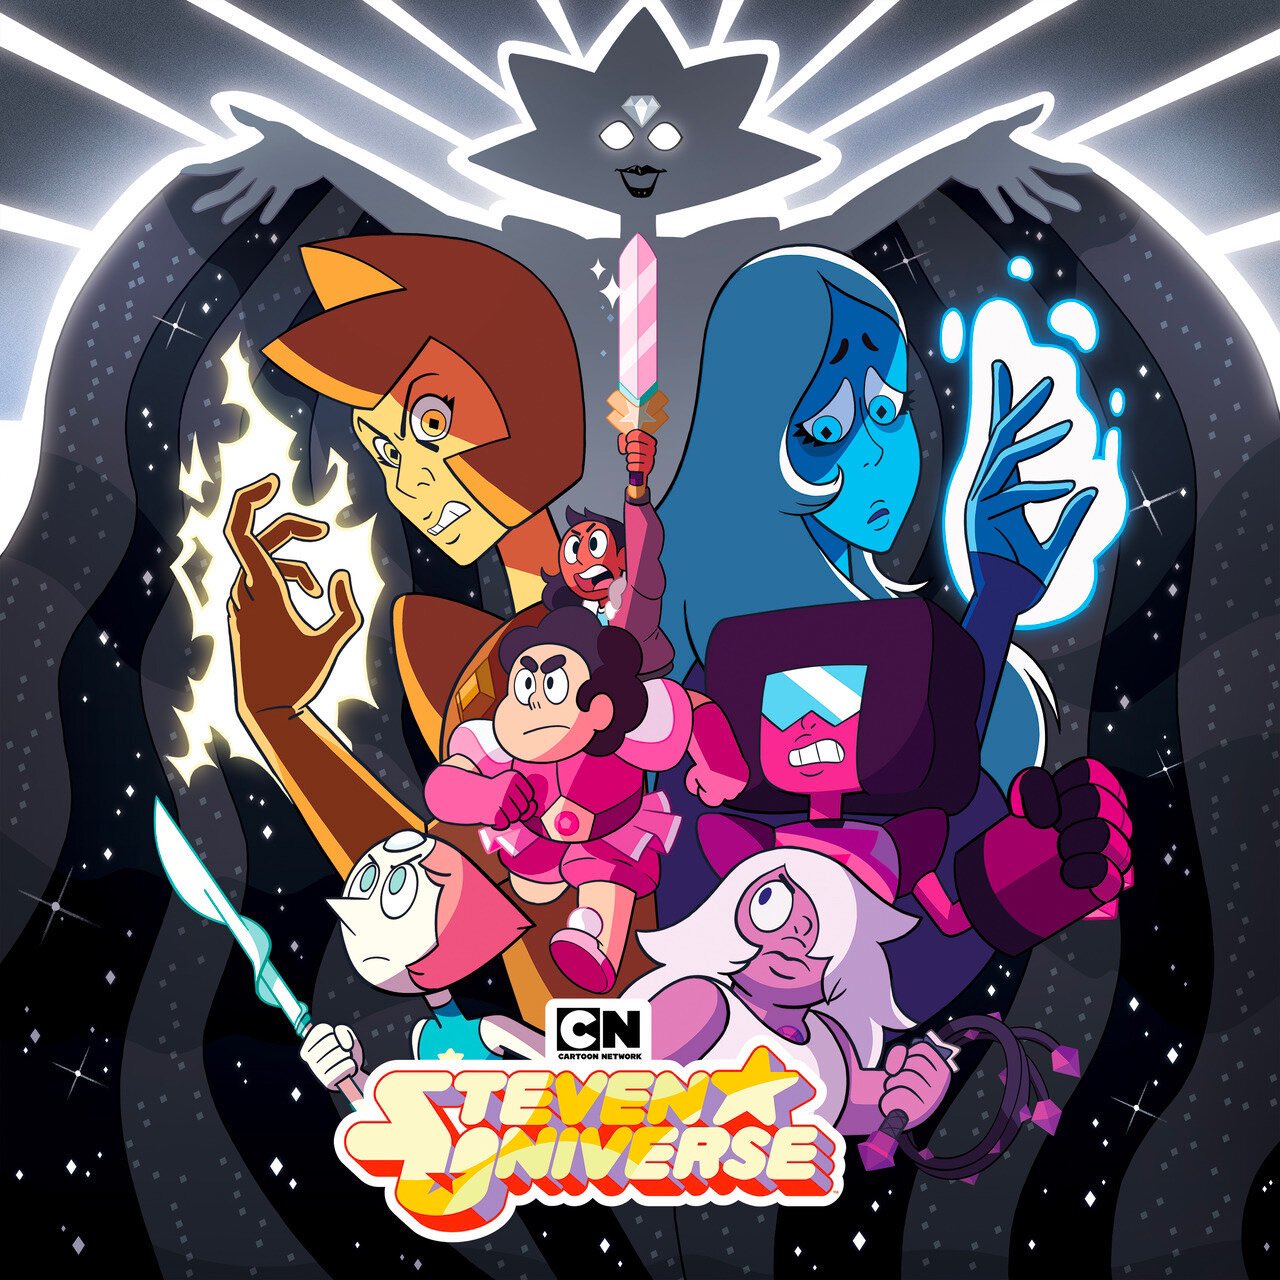 Ccn On Twitter Steven Universe Finished Airing On Cartoon Network